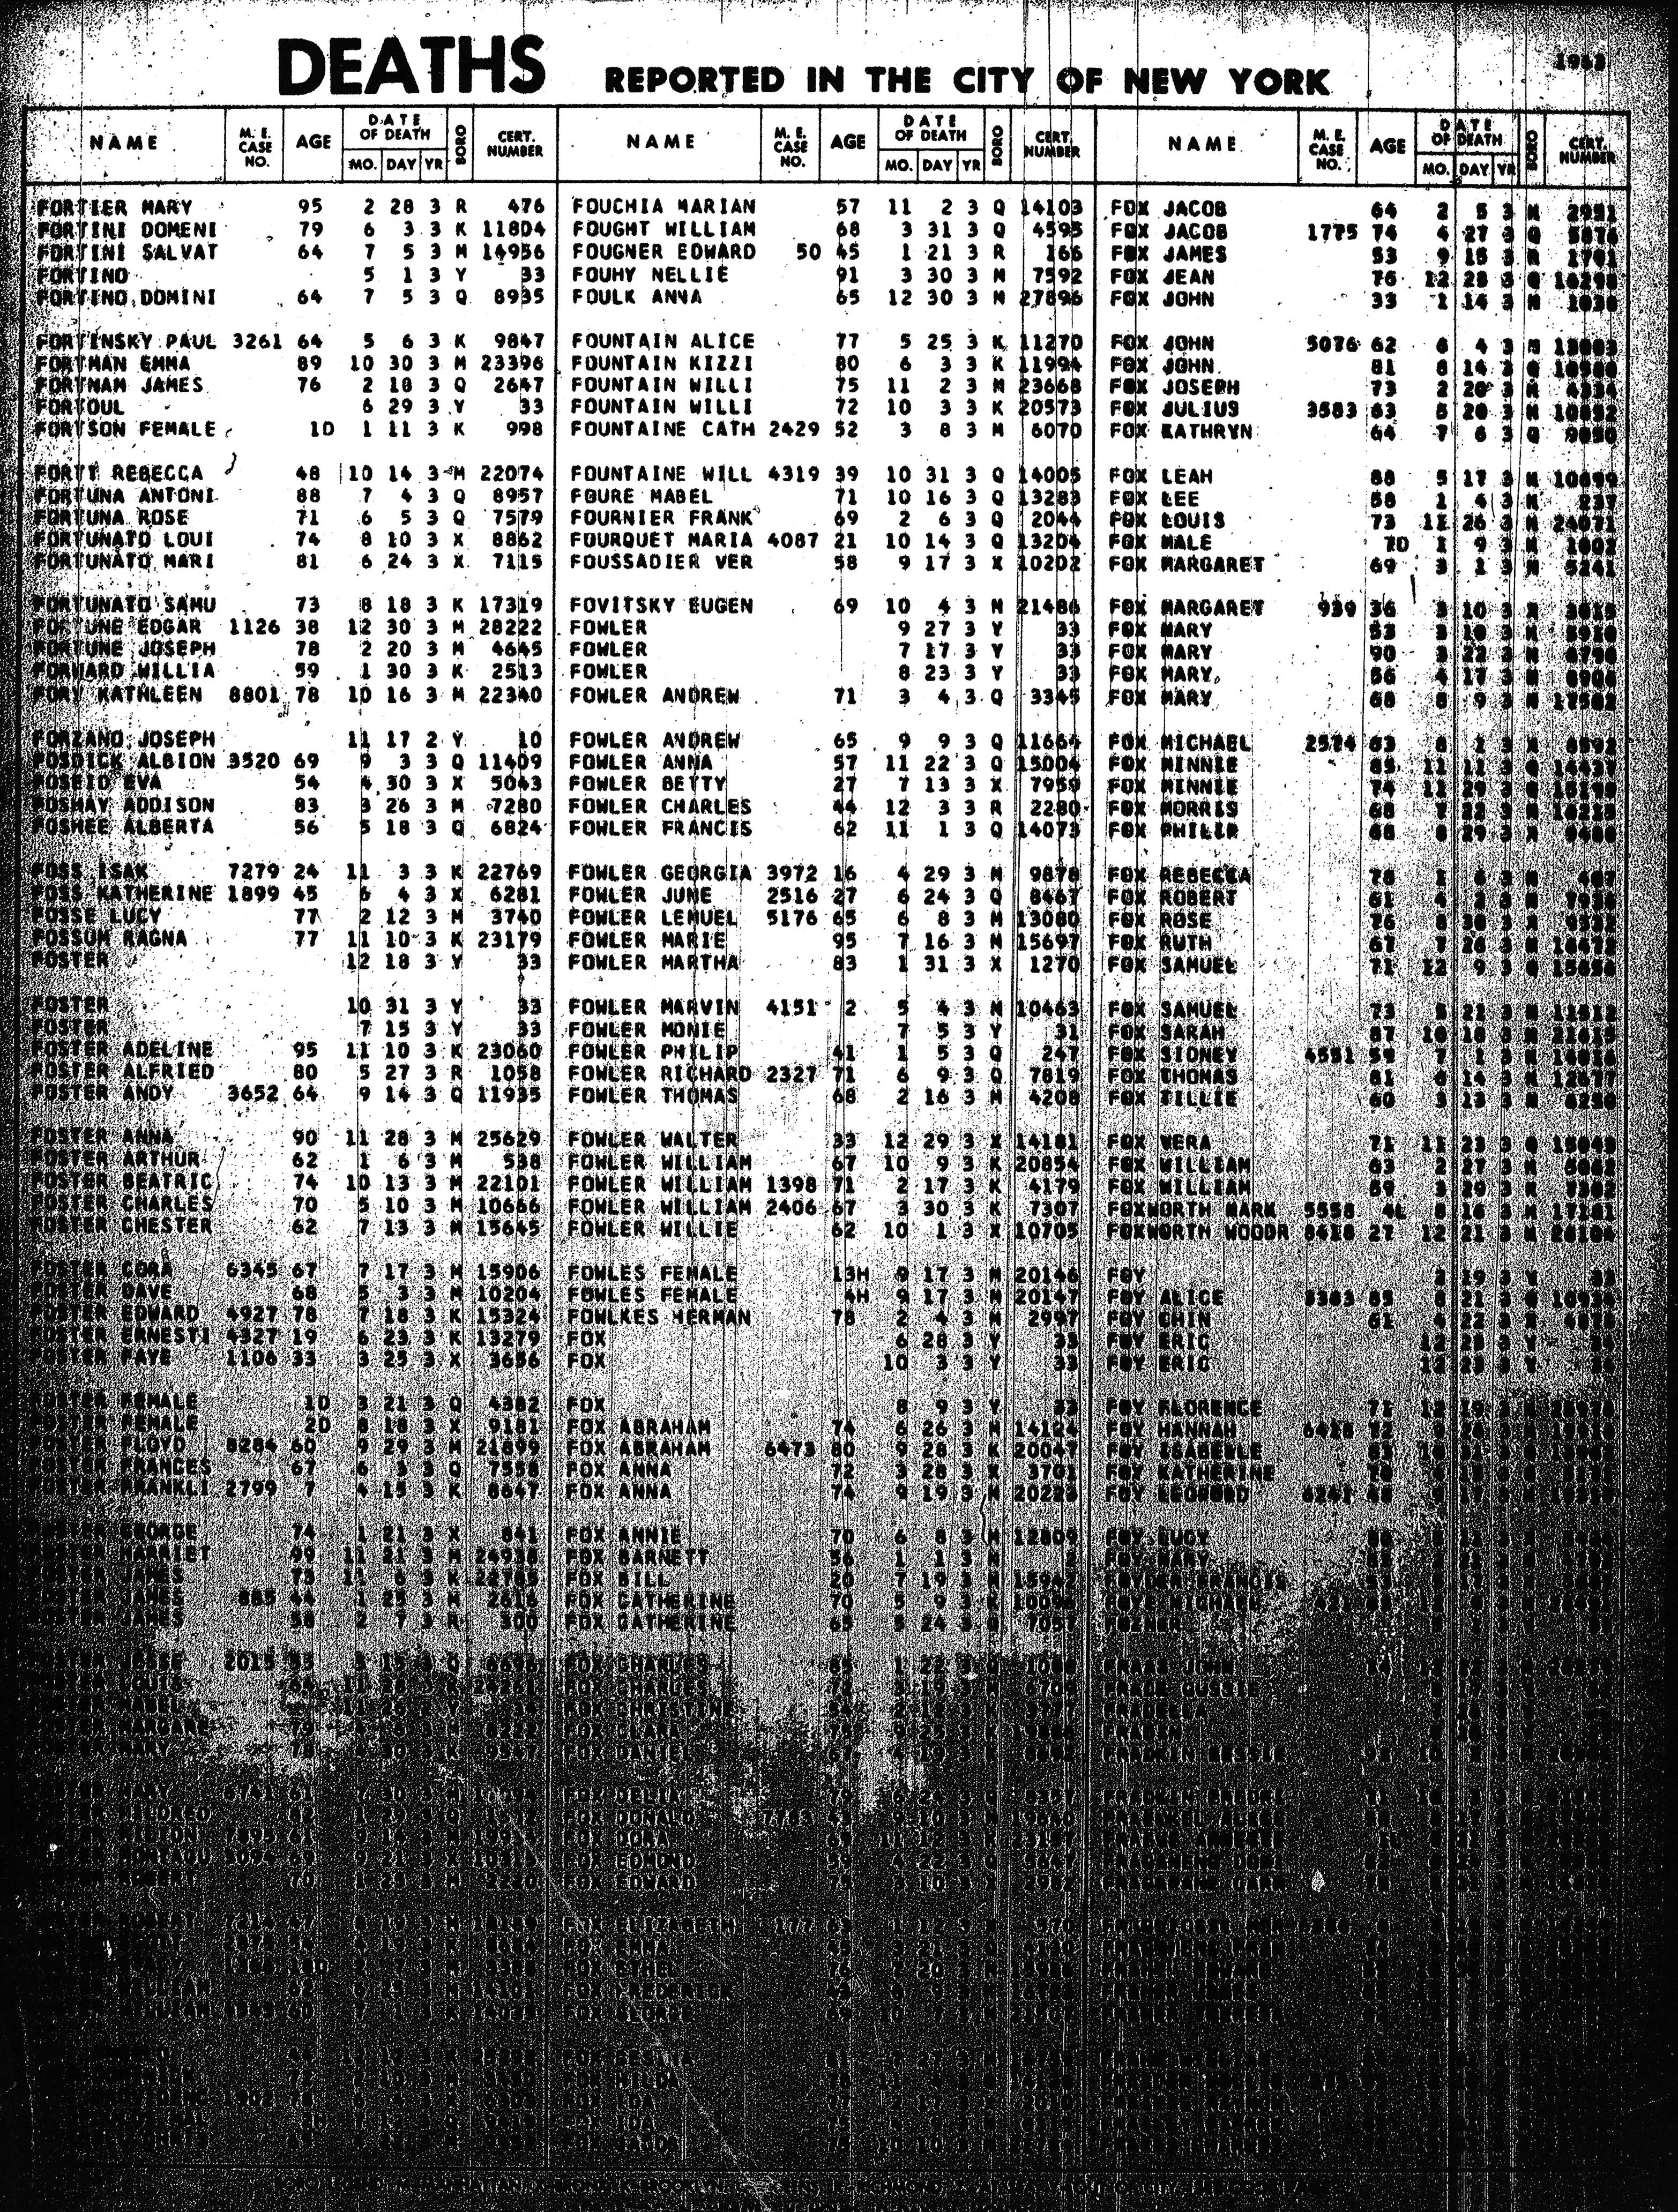 Fowler death record, city of NY, from microfilm